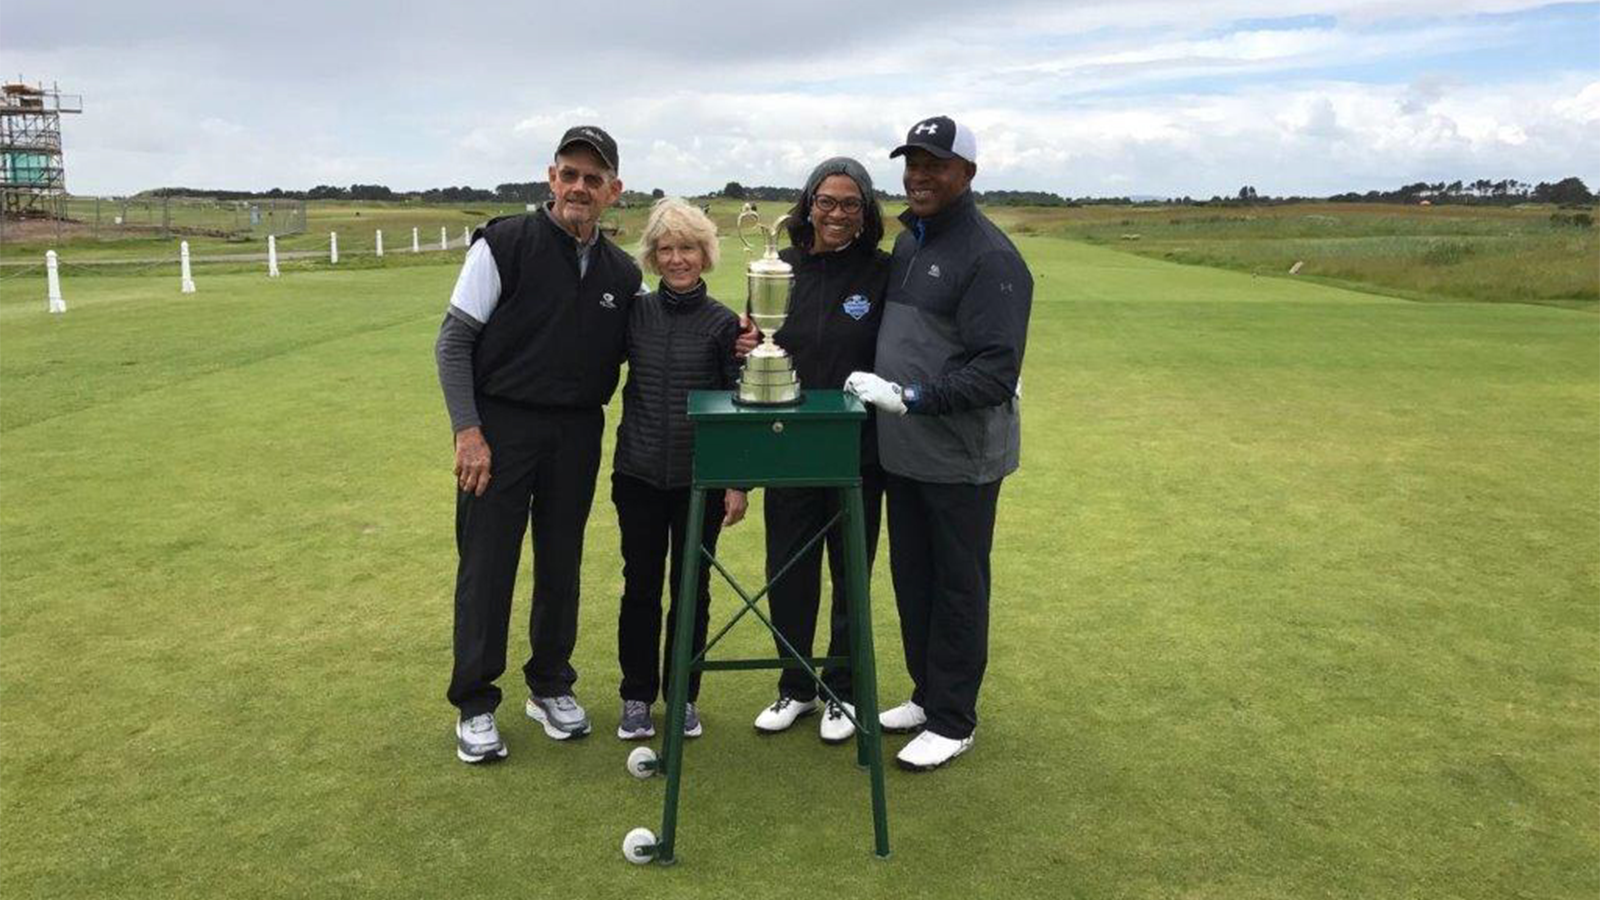 The Walkers & the Wyatts with the Claret Jug. 